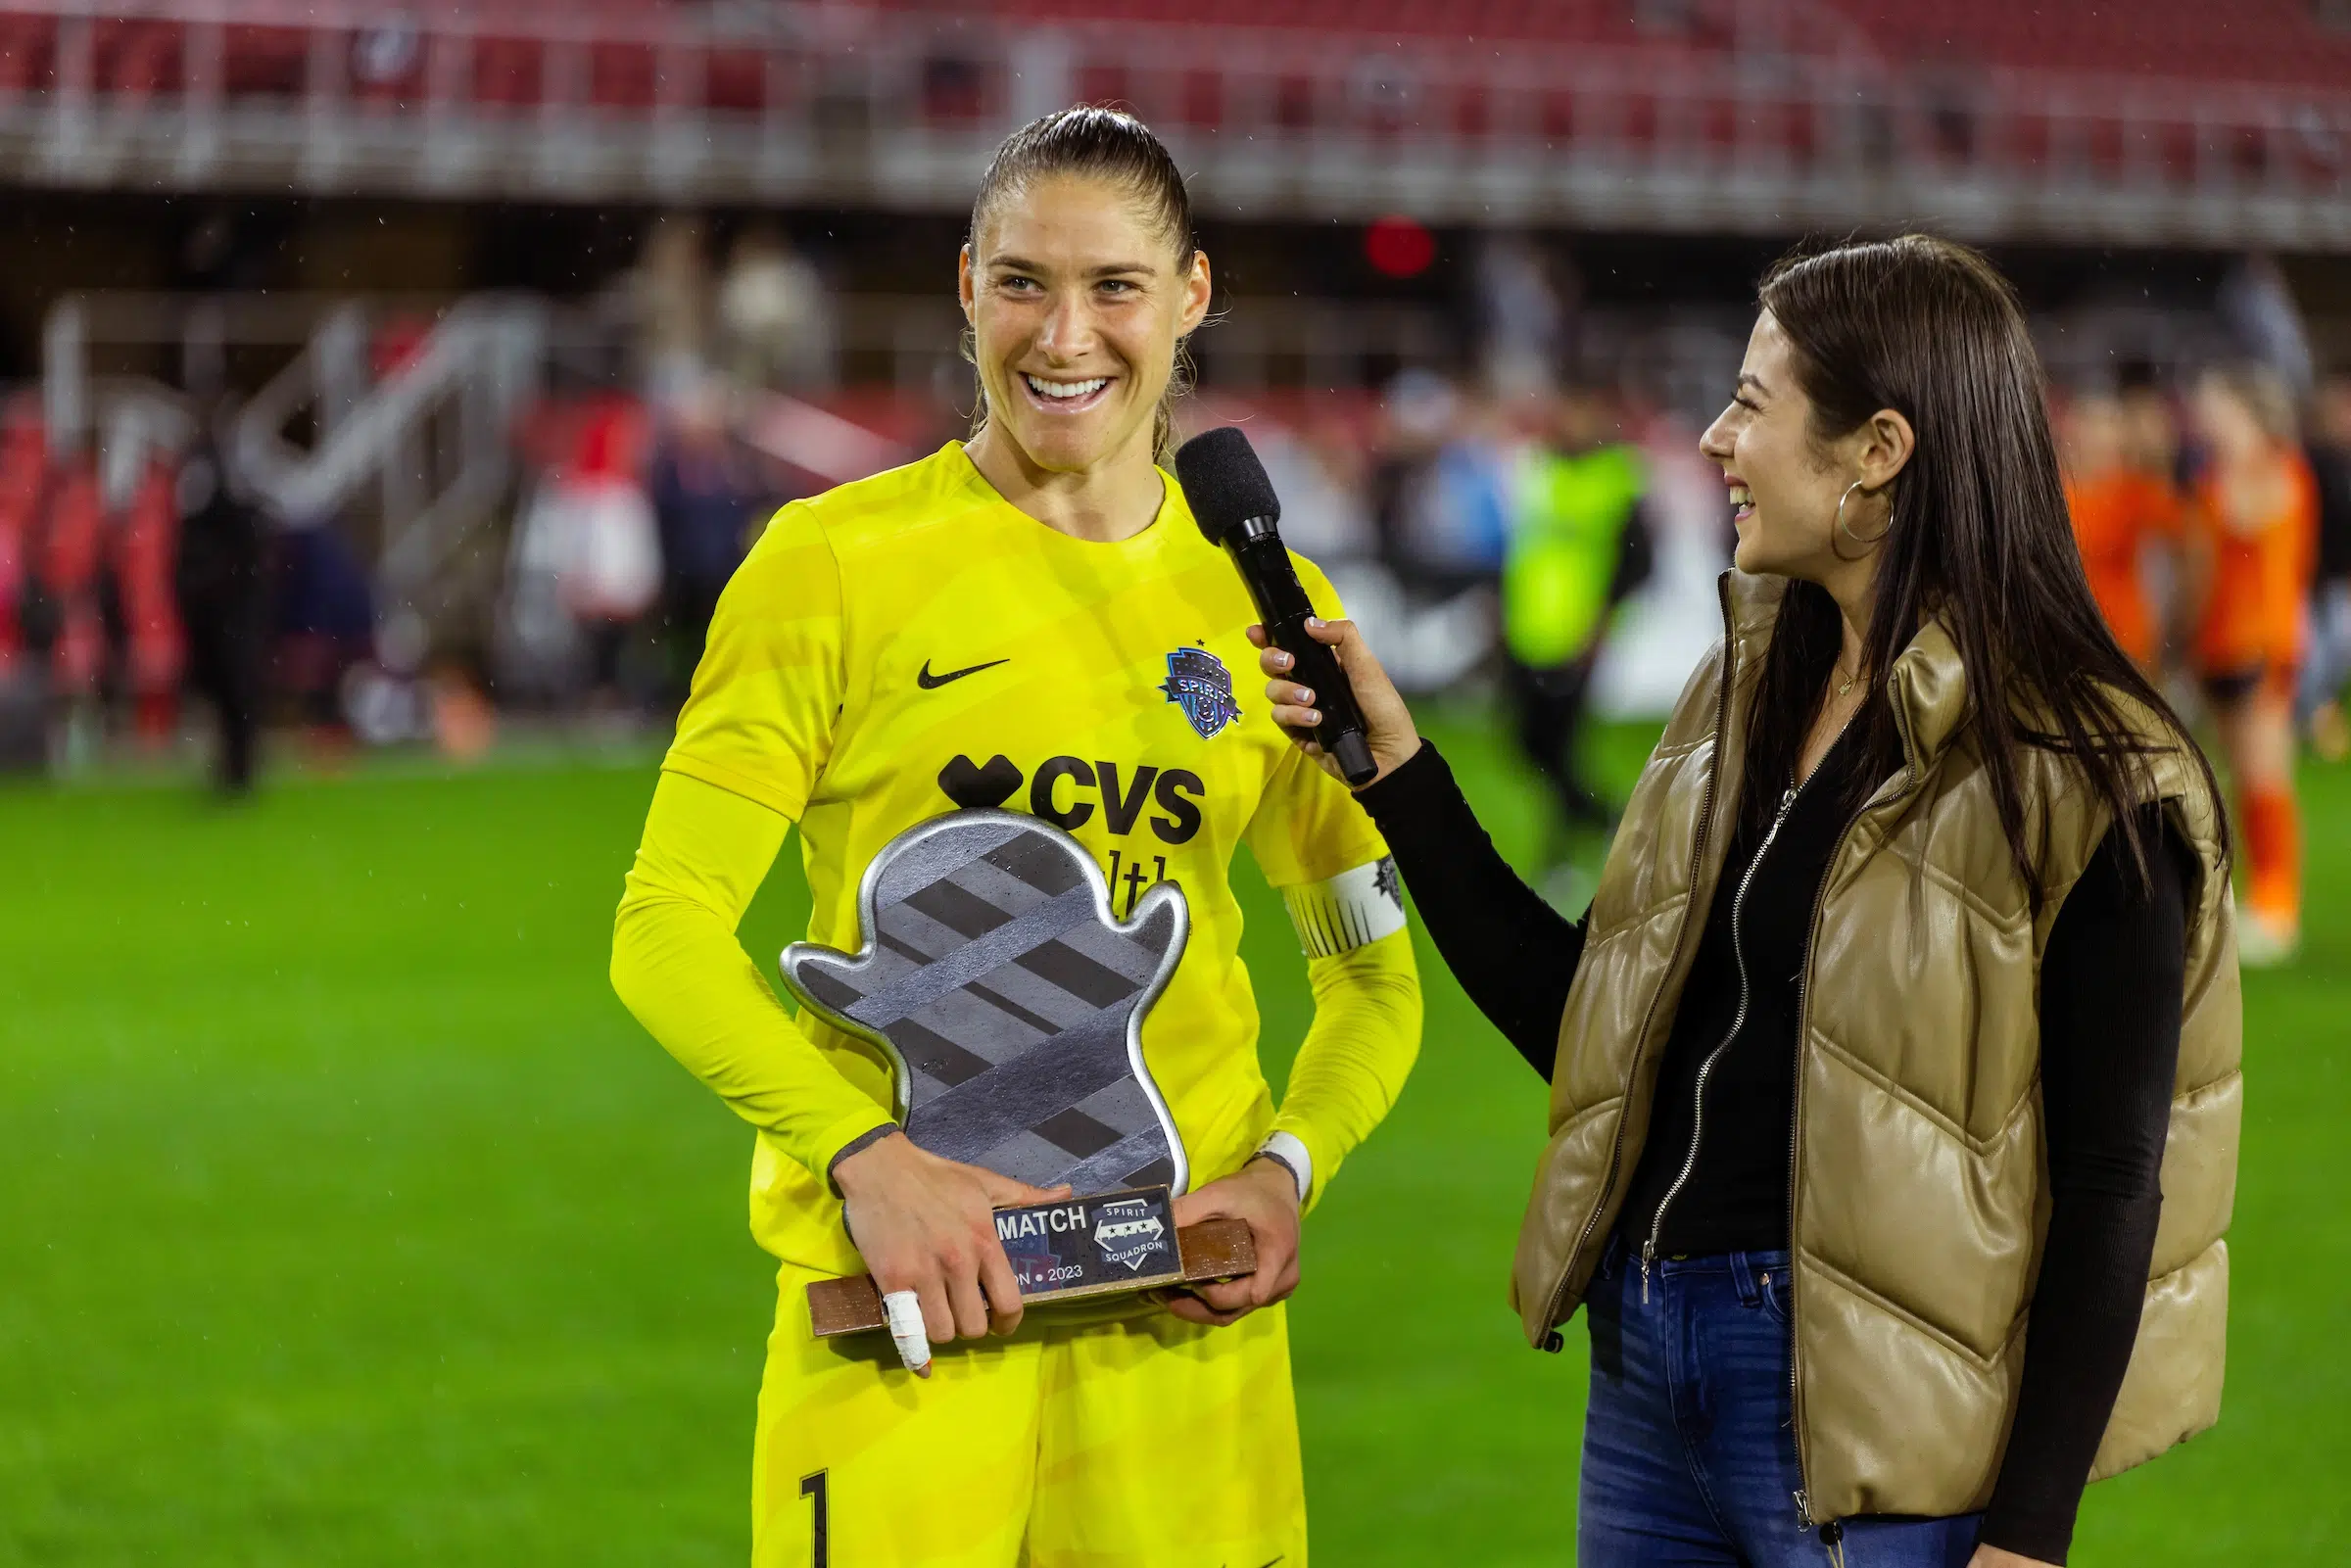 Aubrey Kingsbury in a yellow uniform holds a ghost-emoji shaped trophy while she is interviewed by a woman in a black long sleeve top and tan leather vest.